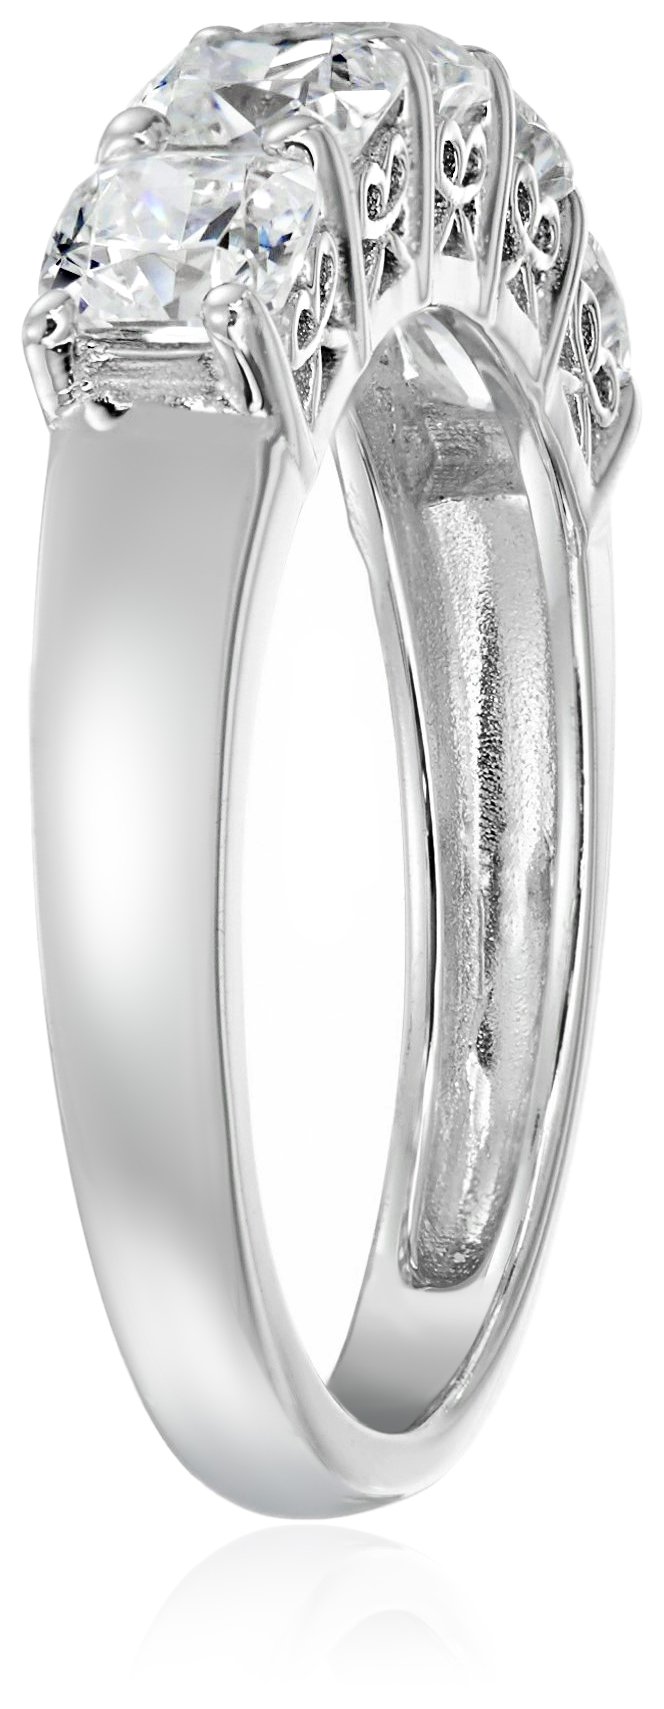 Amazon Collection Platinum or Gold Plated Sterling Silver Fancy Cut 5-Stone Ring made with Infinite Elements Zirconia